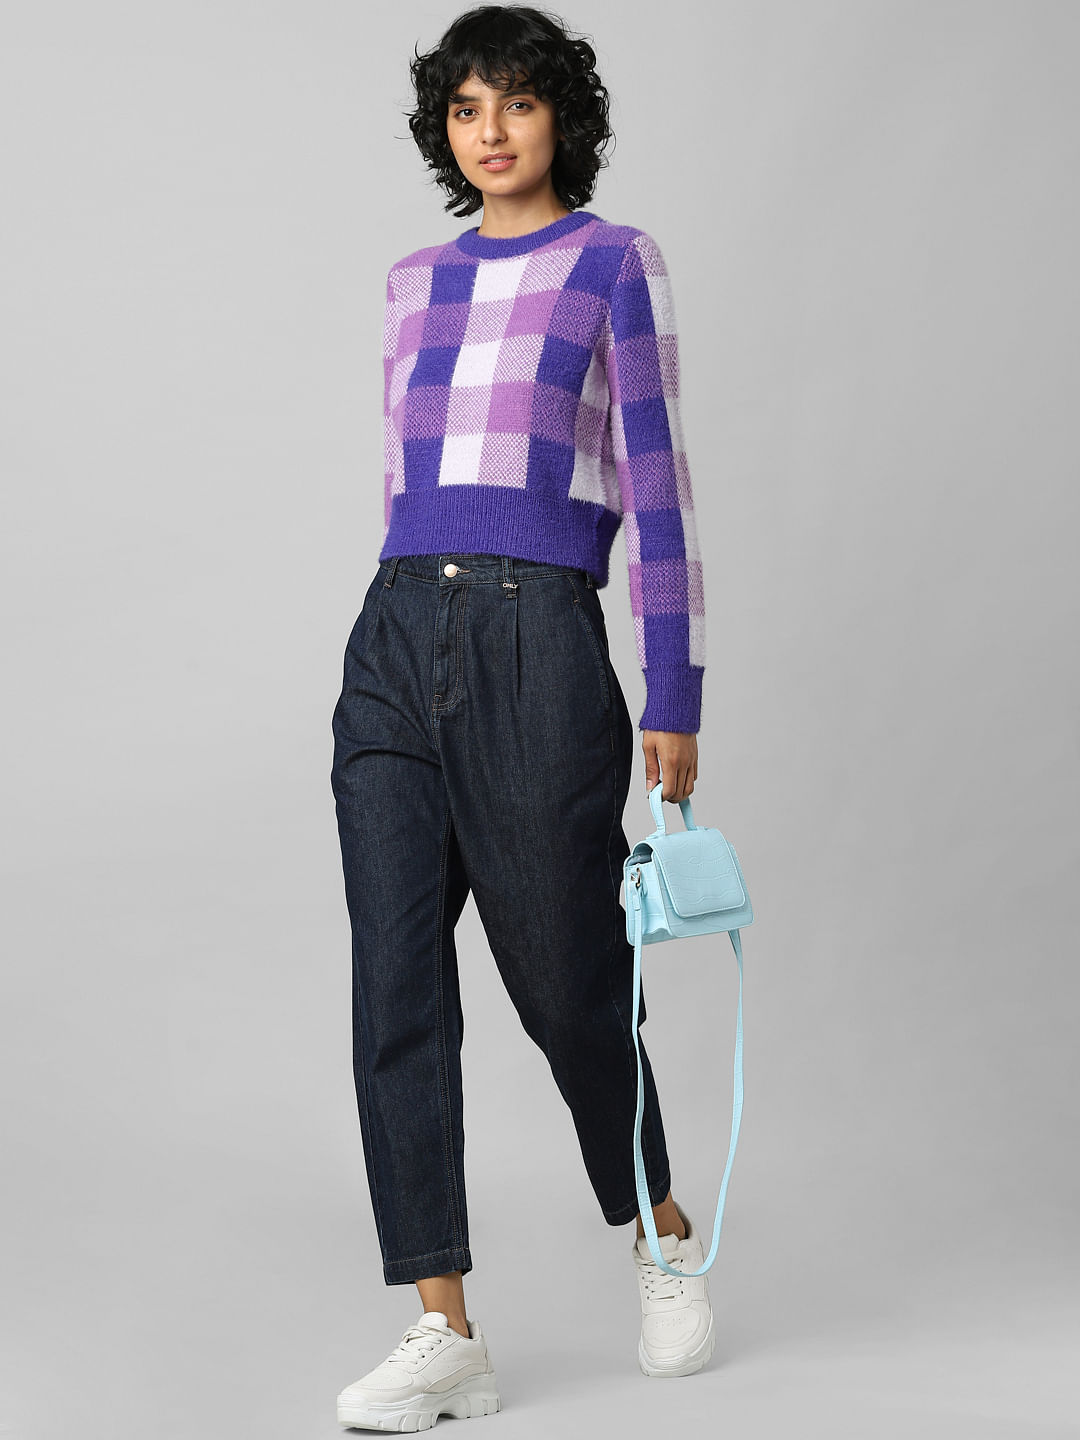 Out From Under Textured Harem Pant | Harem pant, Pants, Urban outfitters